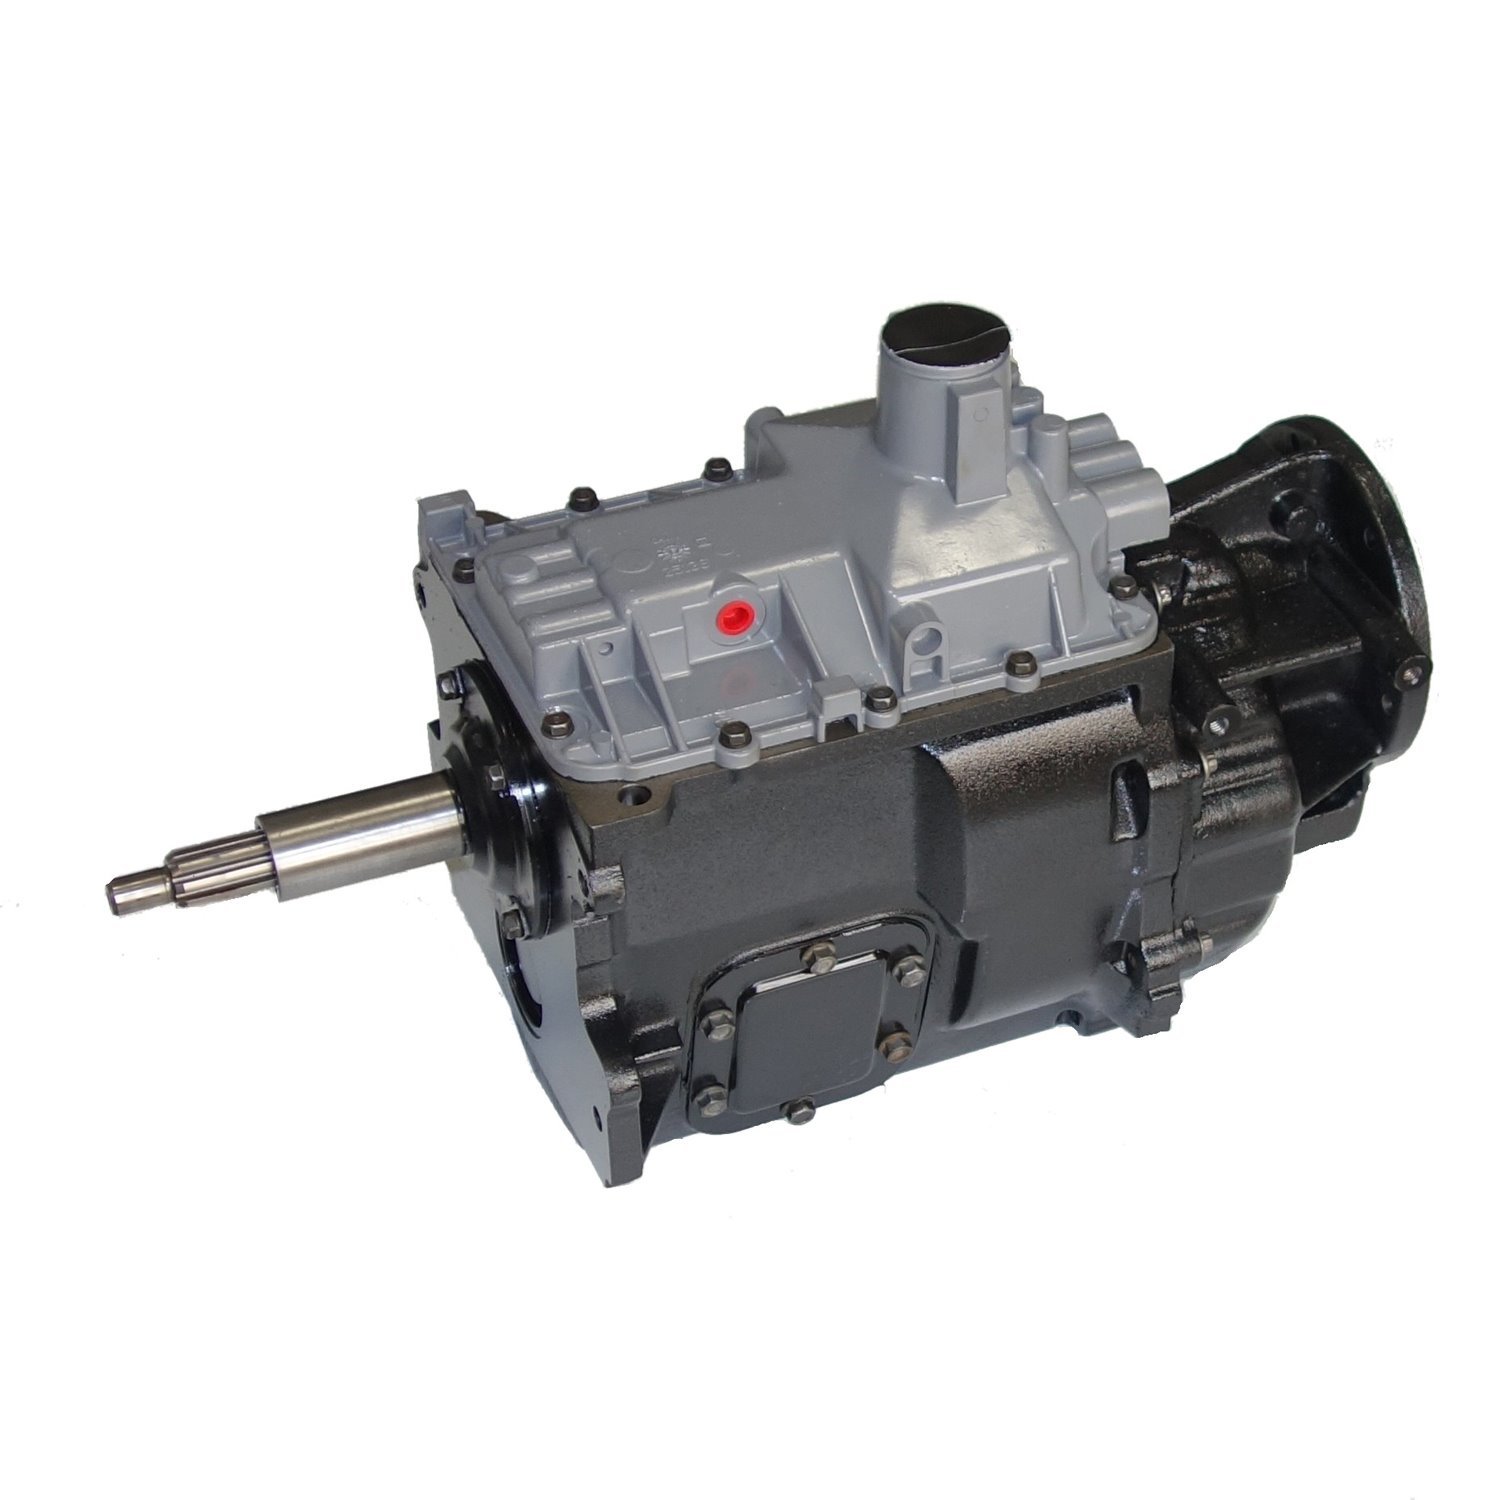 Remanufactured NV4500 Manual Transmission for Dodge 92-93 W-series, 5 Speed